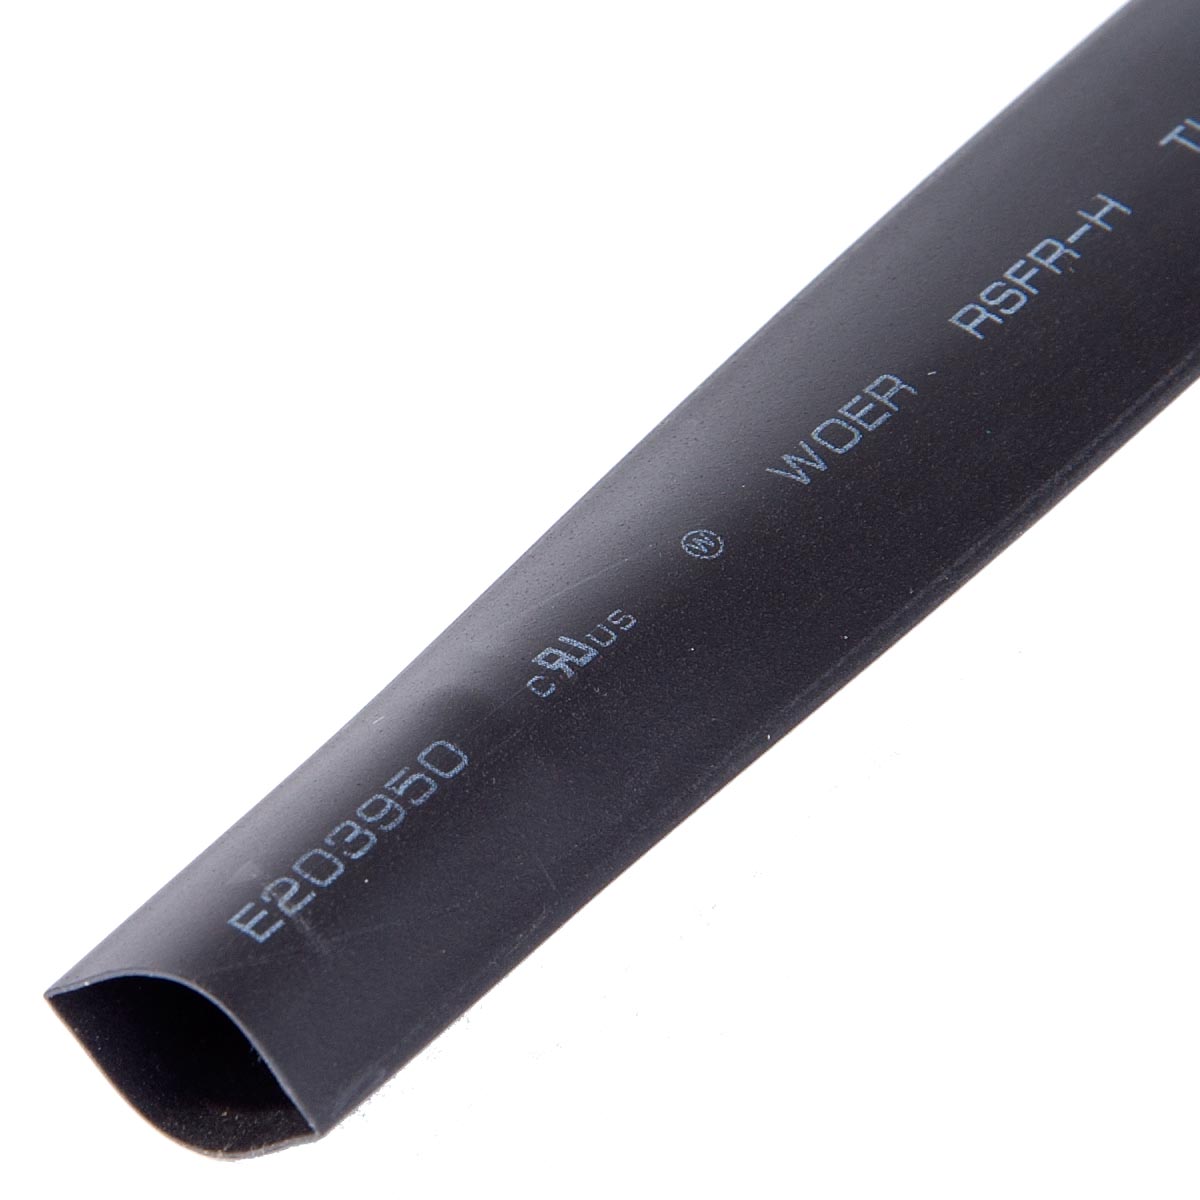 Heat Shrink Electrical Insulation Tubing - 1/2" dia., Sold Per Foot